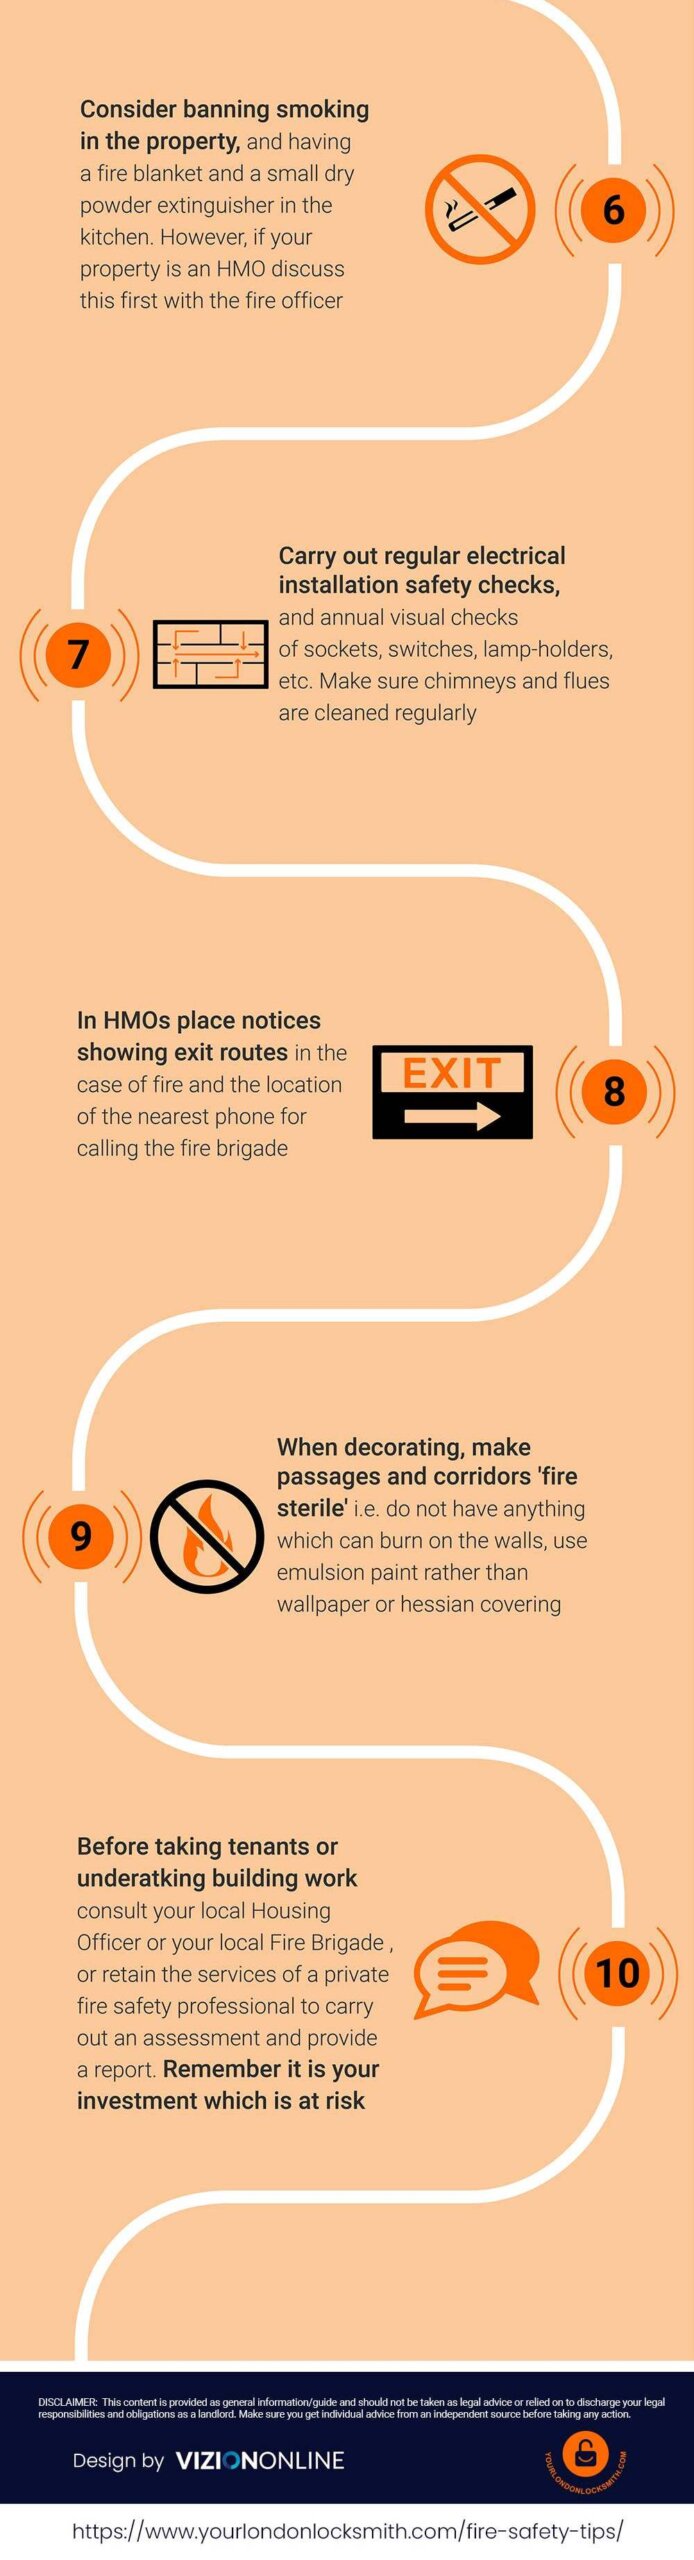 fire-safety-tips - for landlords